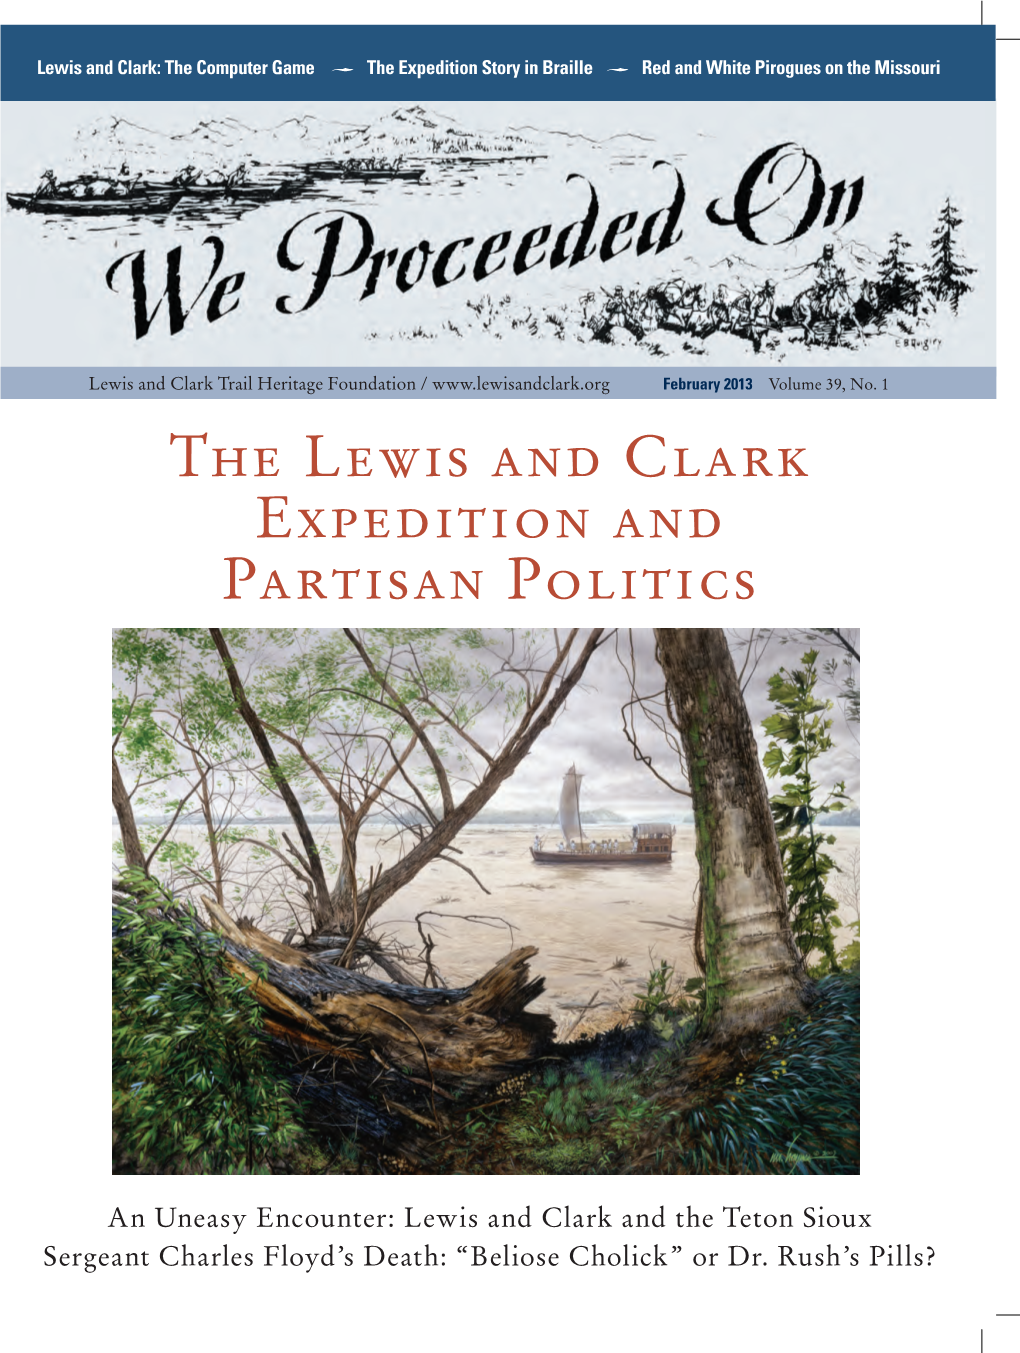 The Lewis and Clark Expedition and Partisan Politics